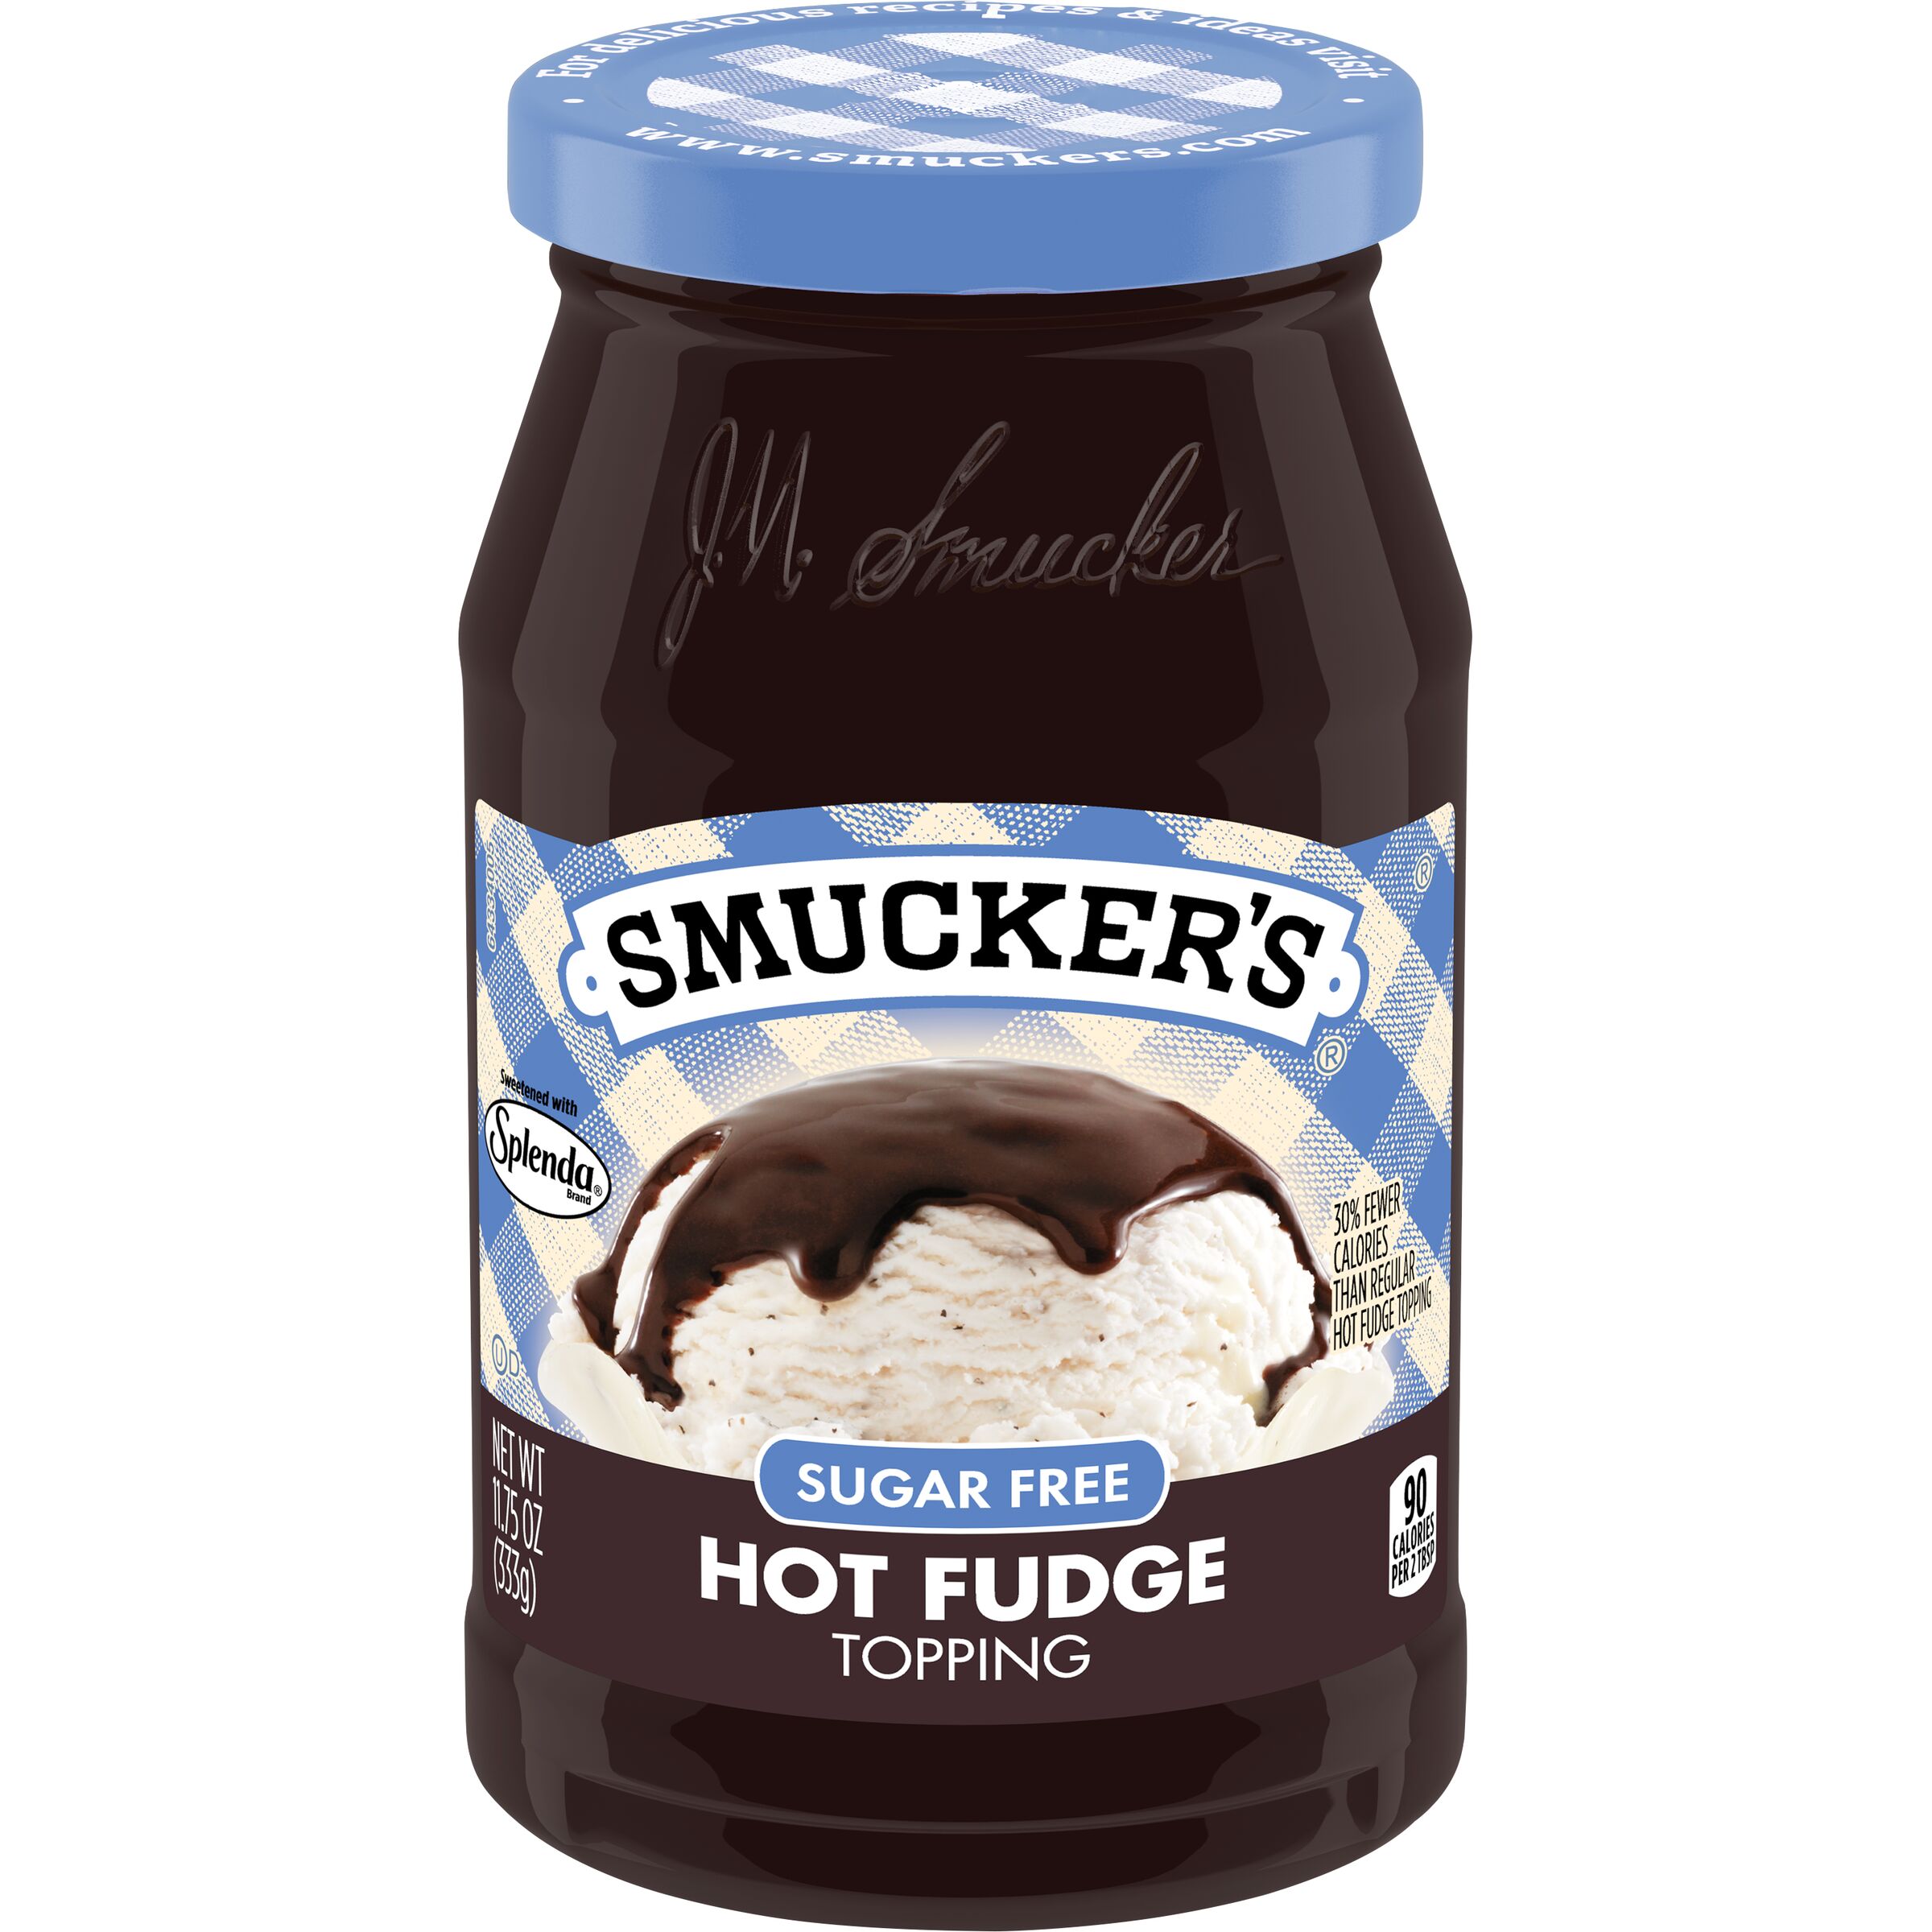 Smucker's Sugar Free Hot Fudge Topping, 11.75 Ounces - image 1 of 6